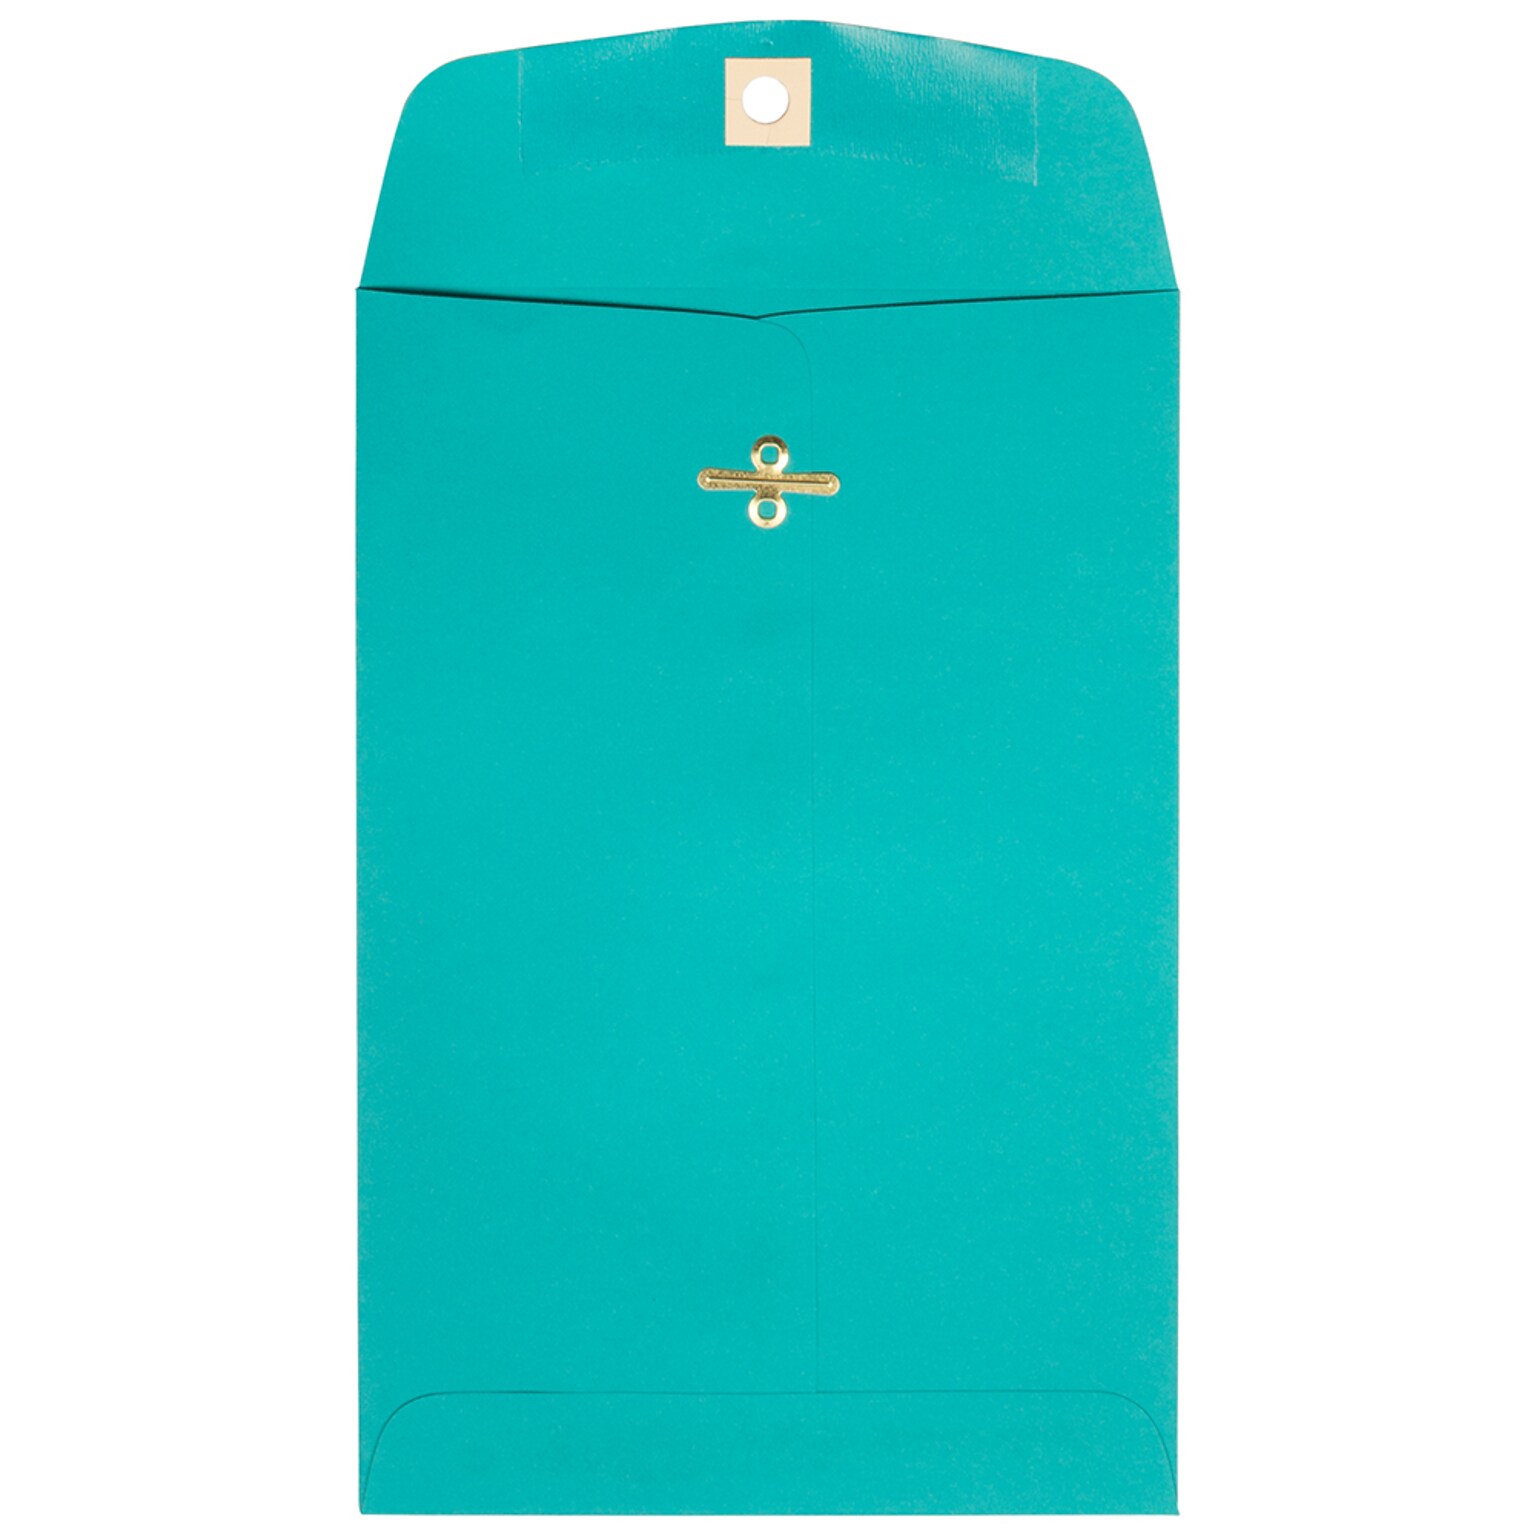 JAM Paper 6 x 9 Open End Catalog Colored Envelopes with Clasp Closure, Sea Blue Recycled, 10/Pack (900807461B)